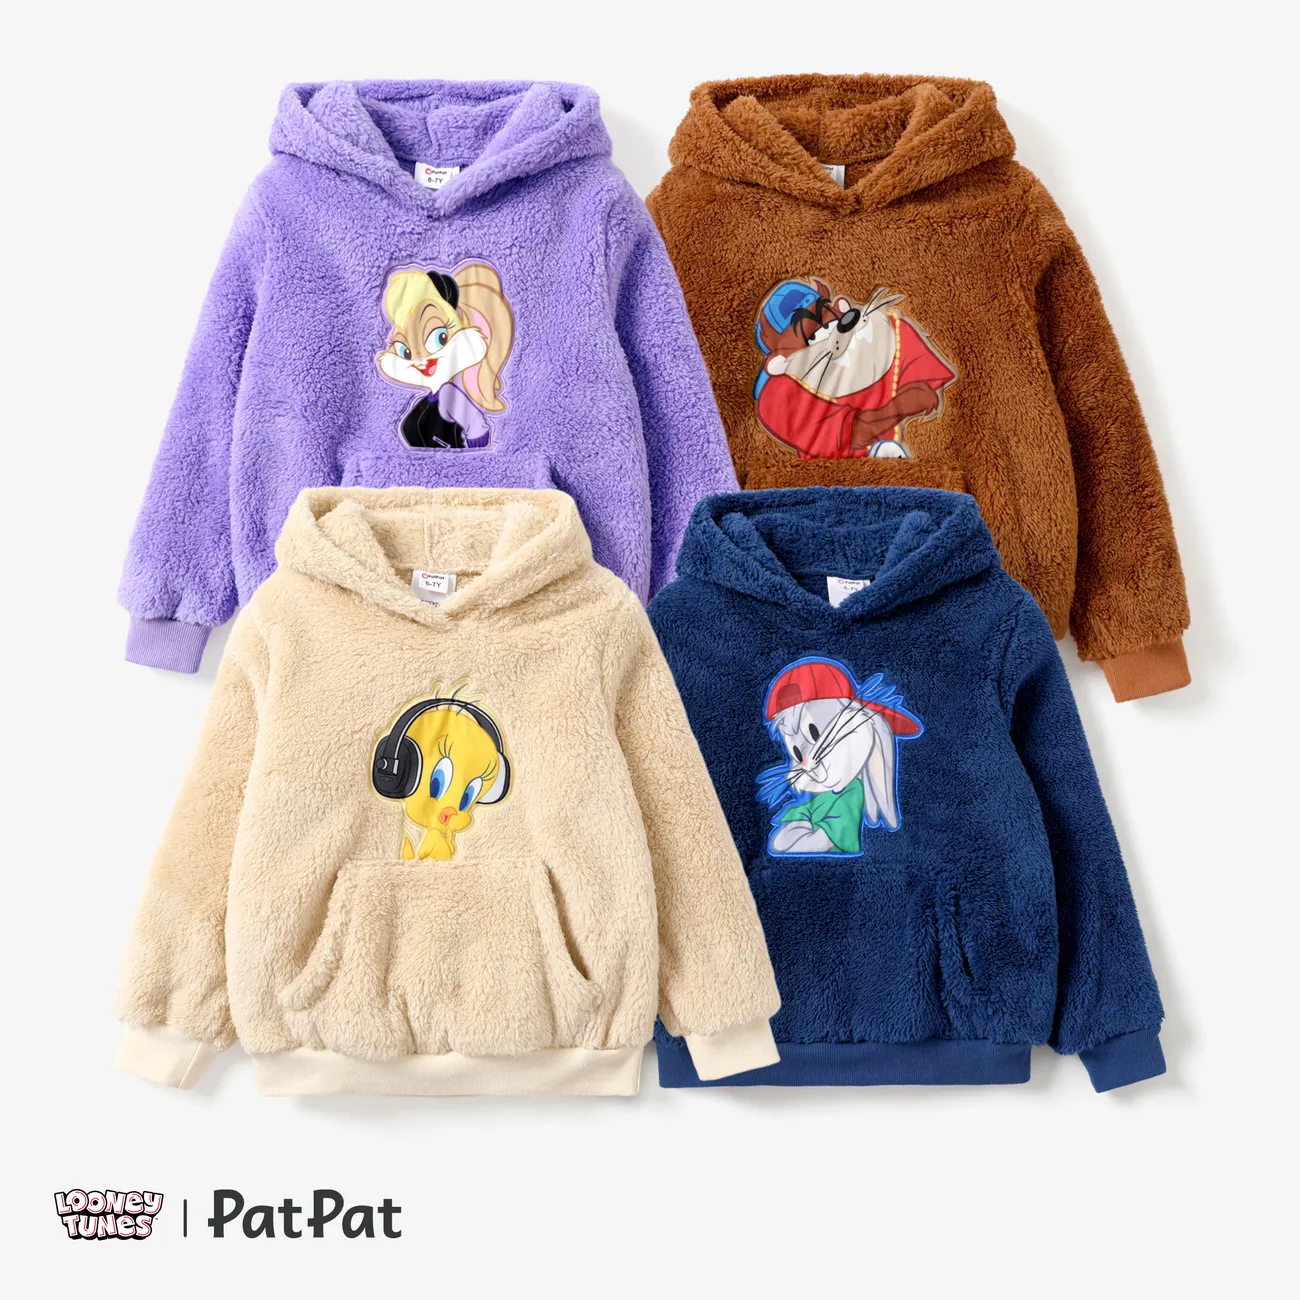 Looney Tunes Toddler Girls Graphic Hooded Sweatshirt Creamcolored big image 1